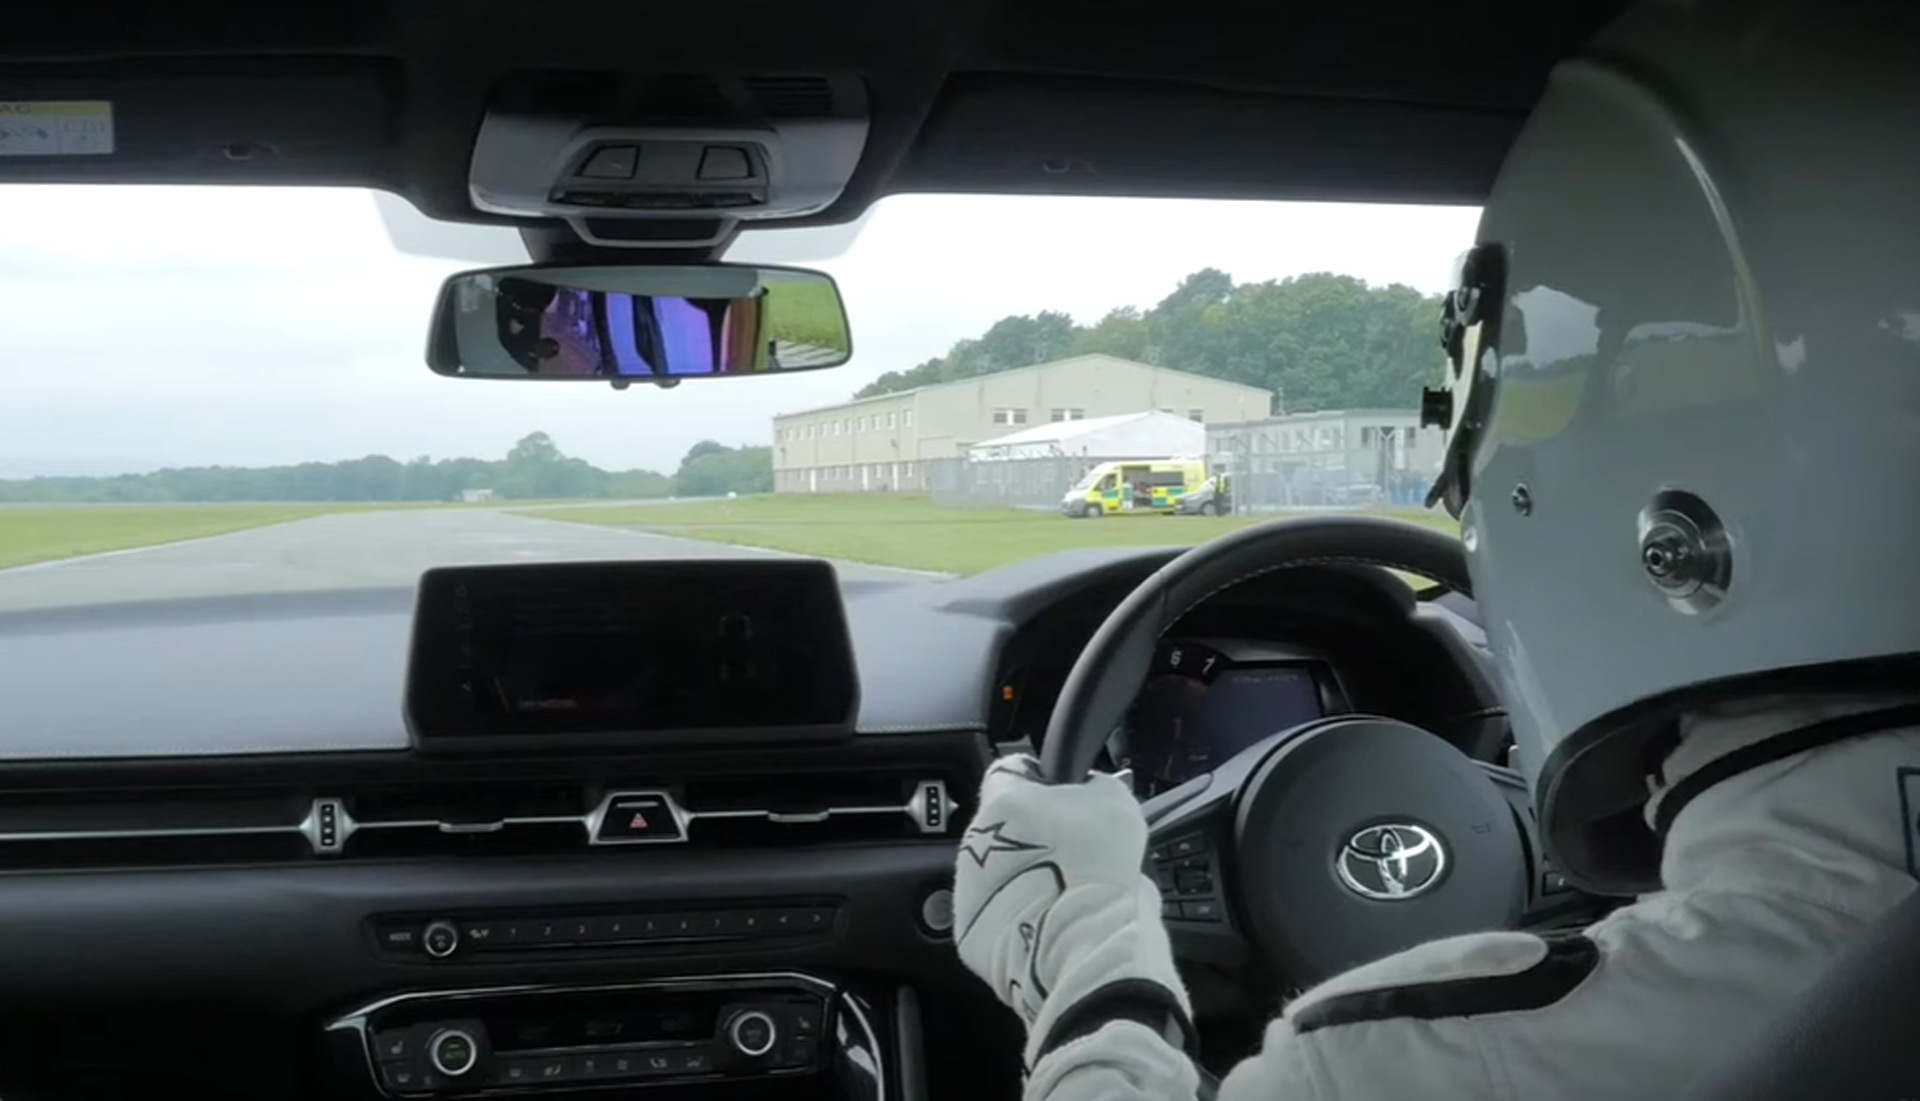 The stig drives the 2020 toyota supra at the top gear test track 100708133 h